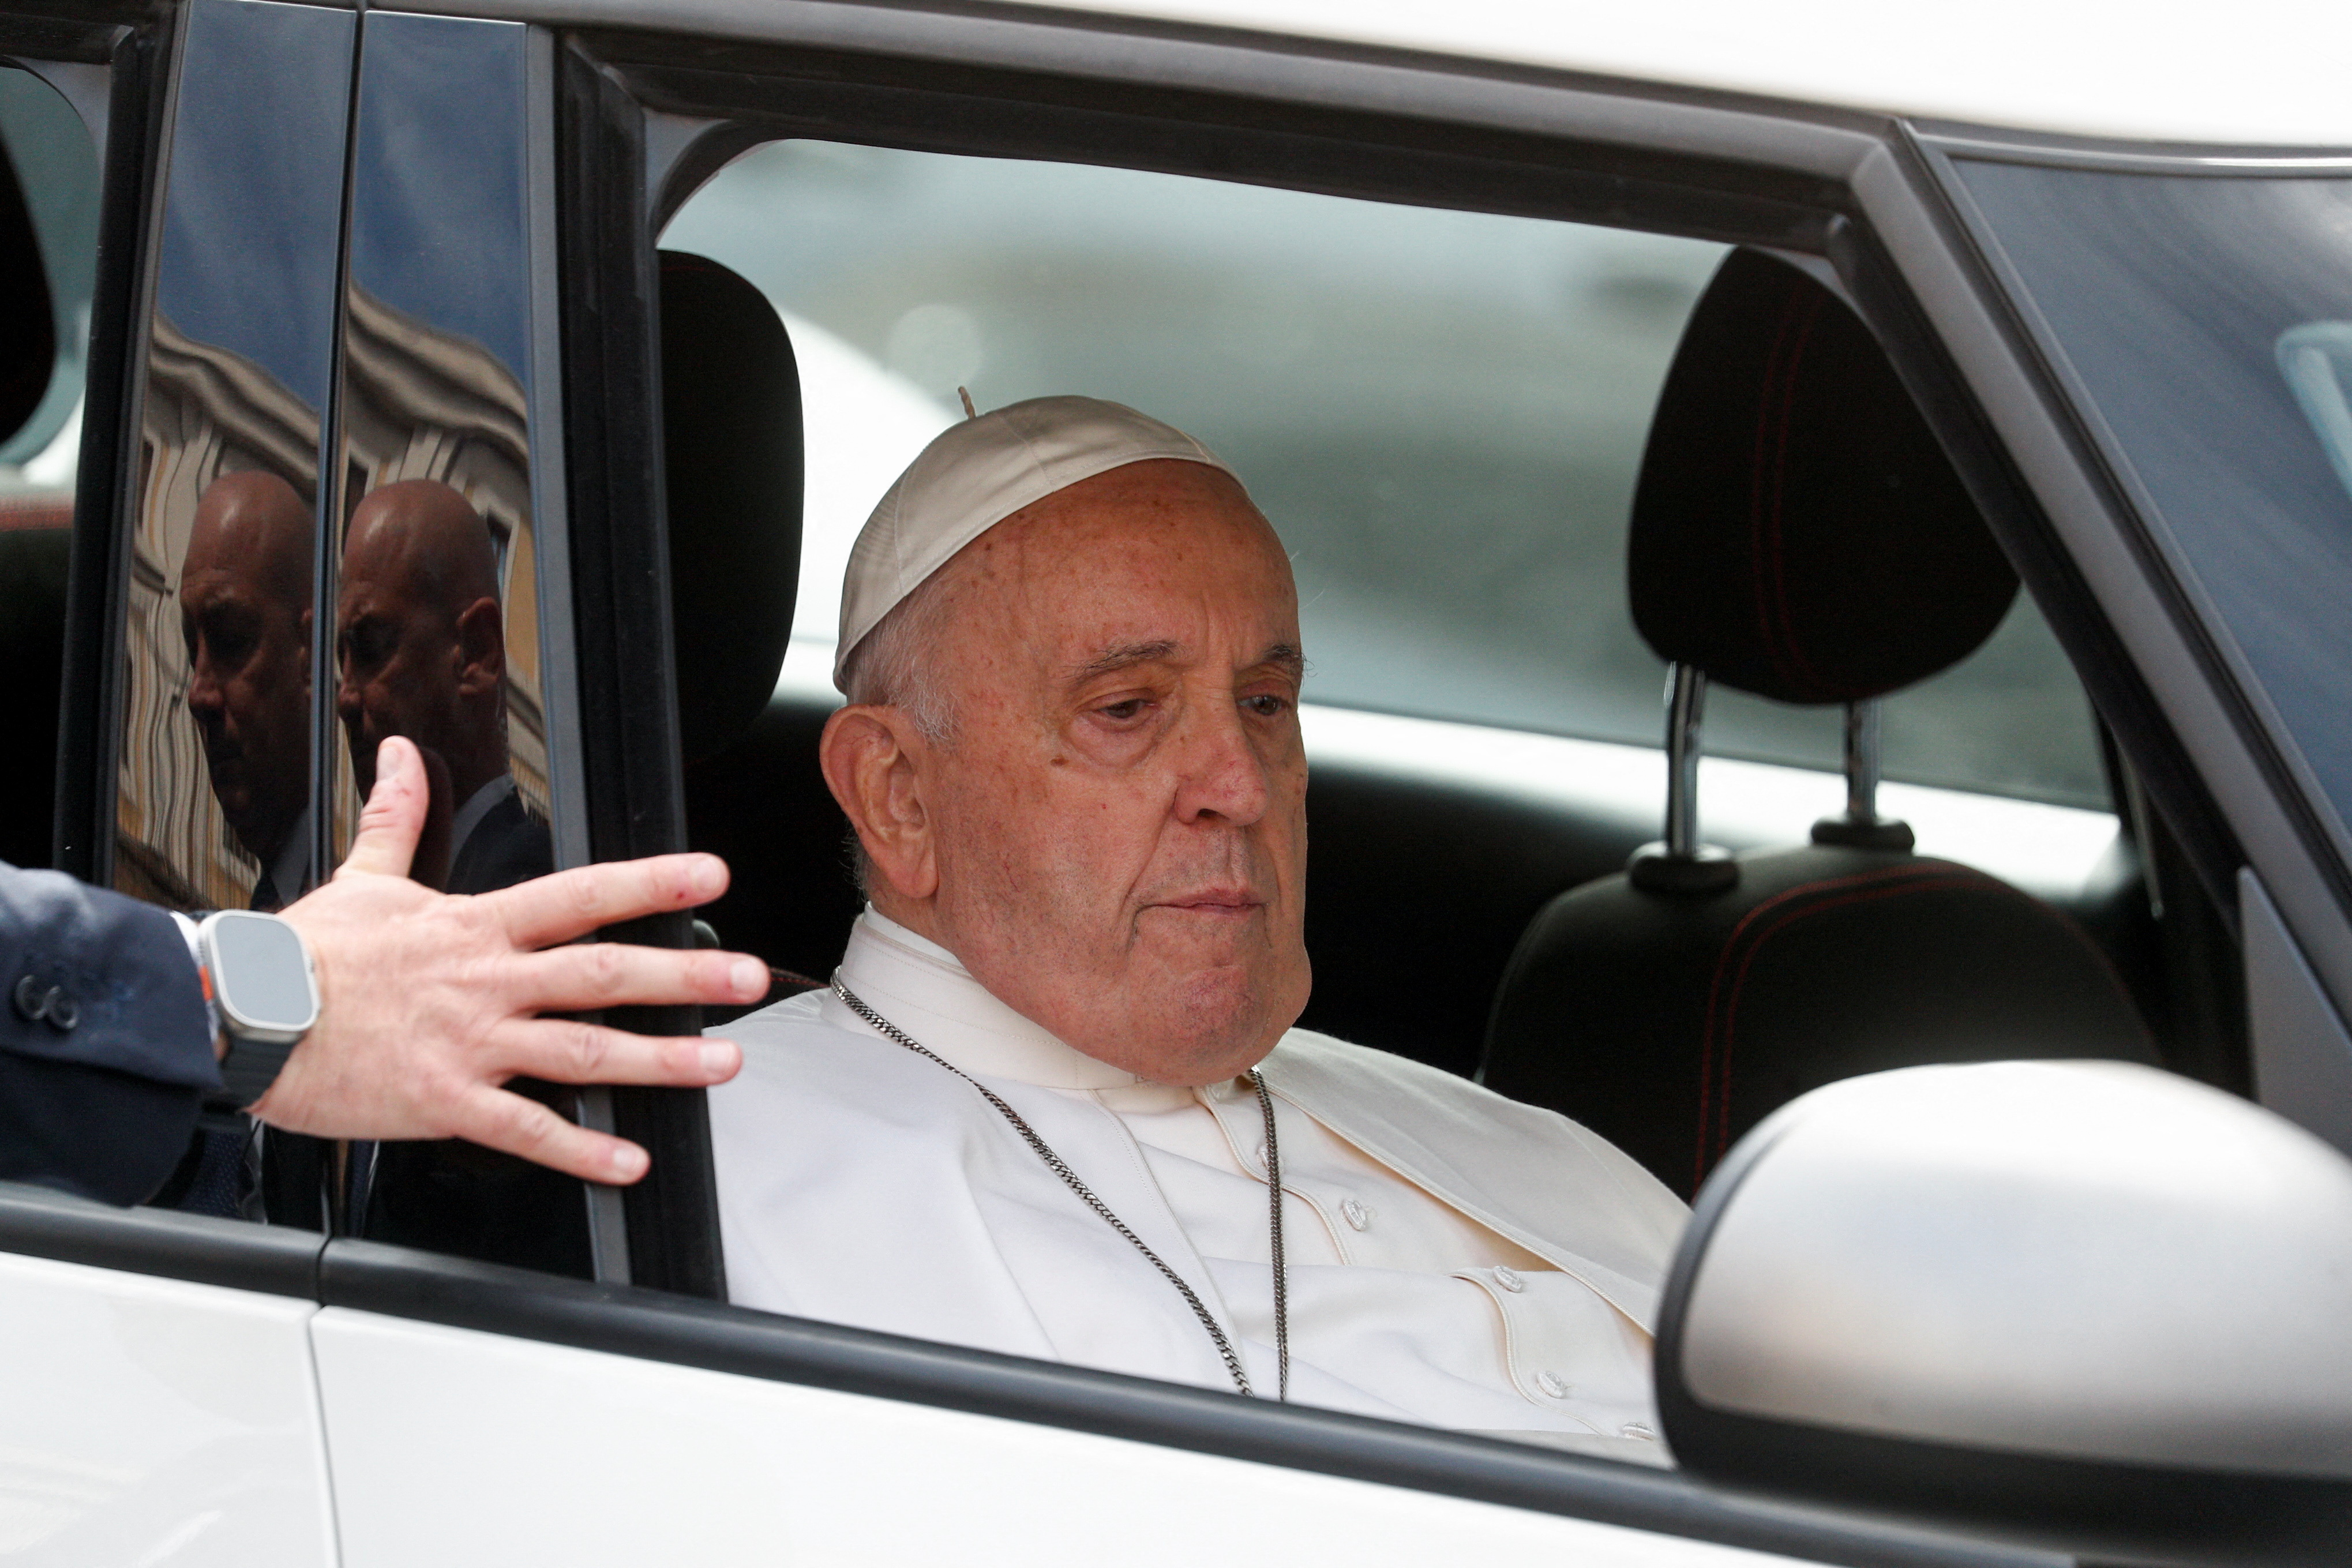 Pope Francis is discharged from Gemelli hospital in Rome